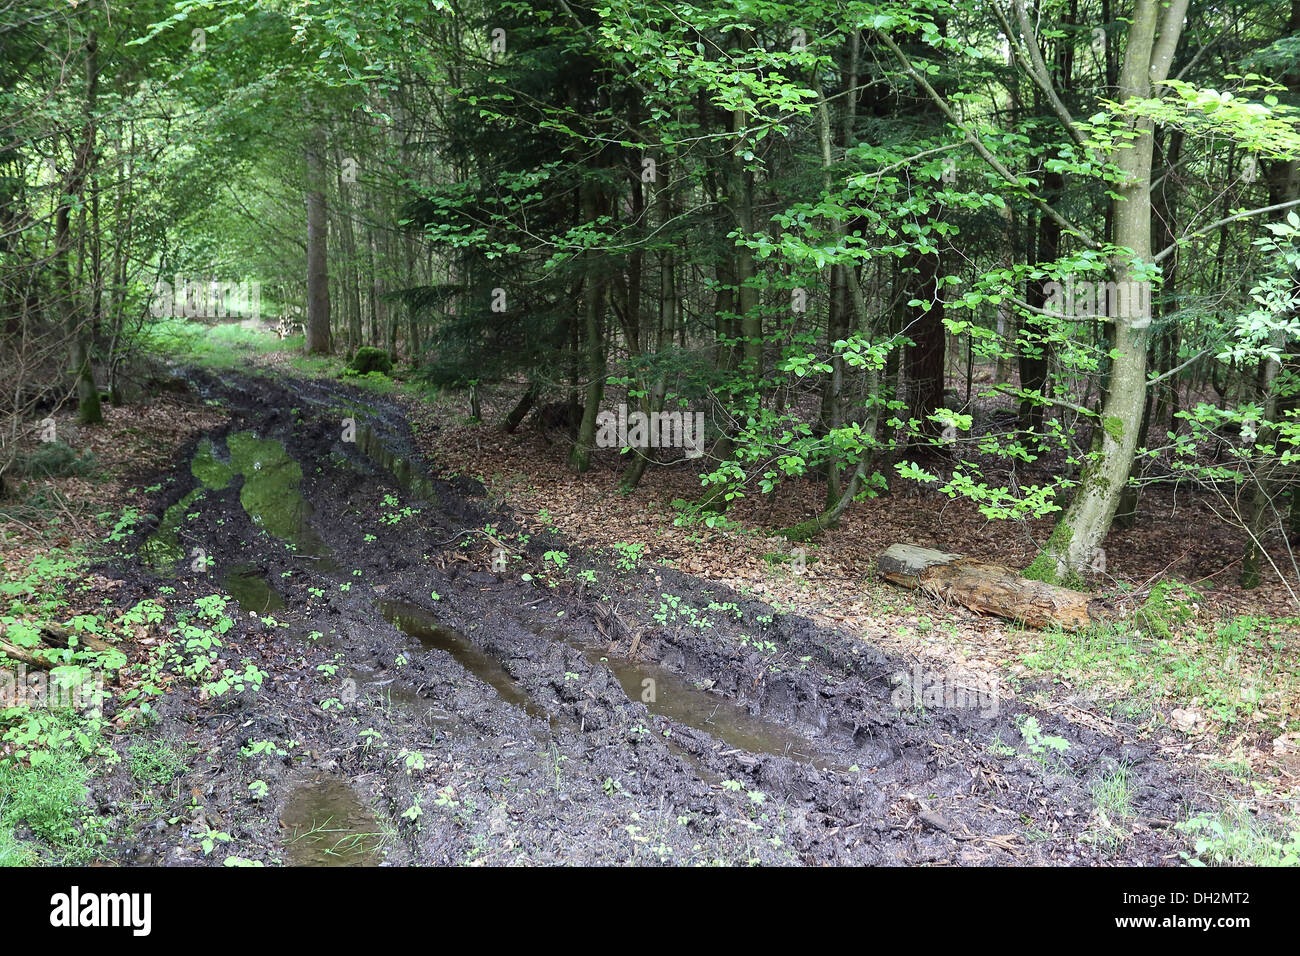 Soil destruction due to forestry activities Stock Photo